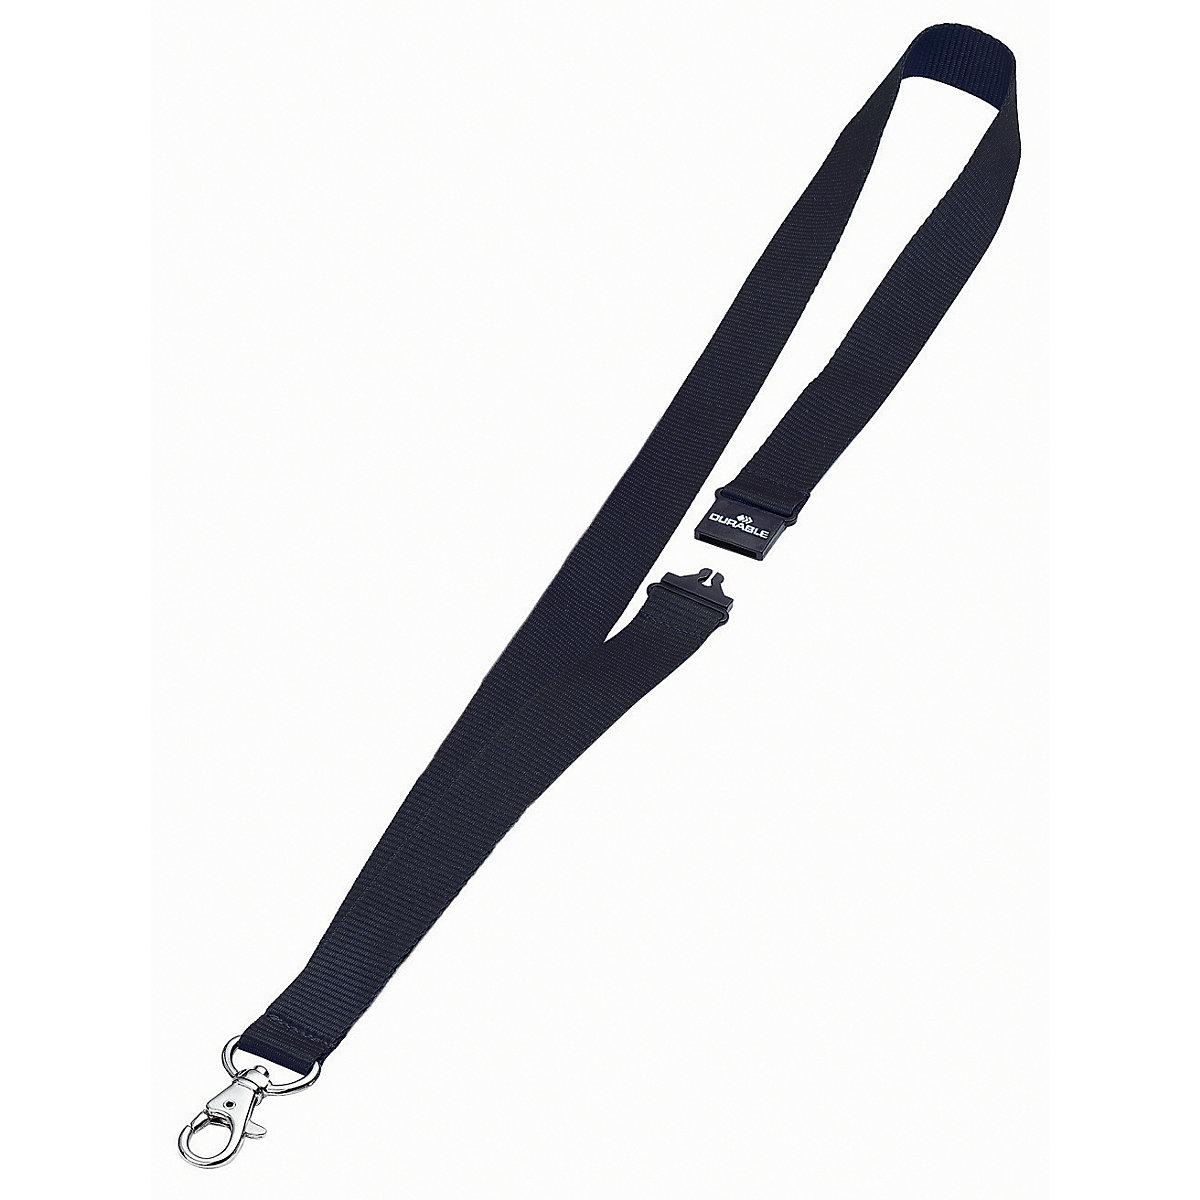 Fabric straps with snap hook - DURABLE